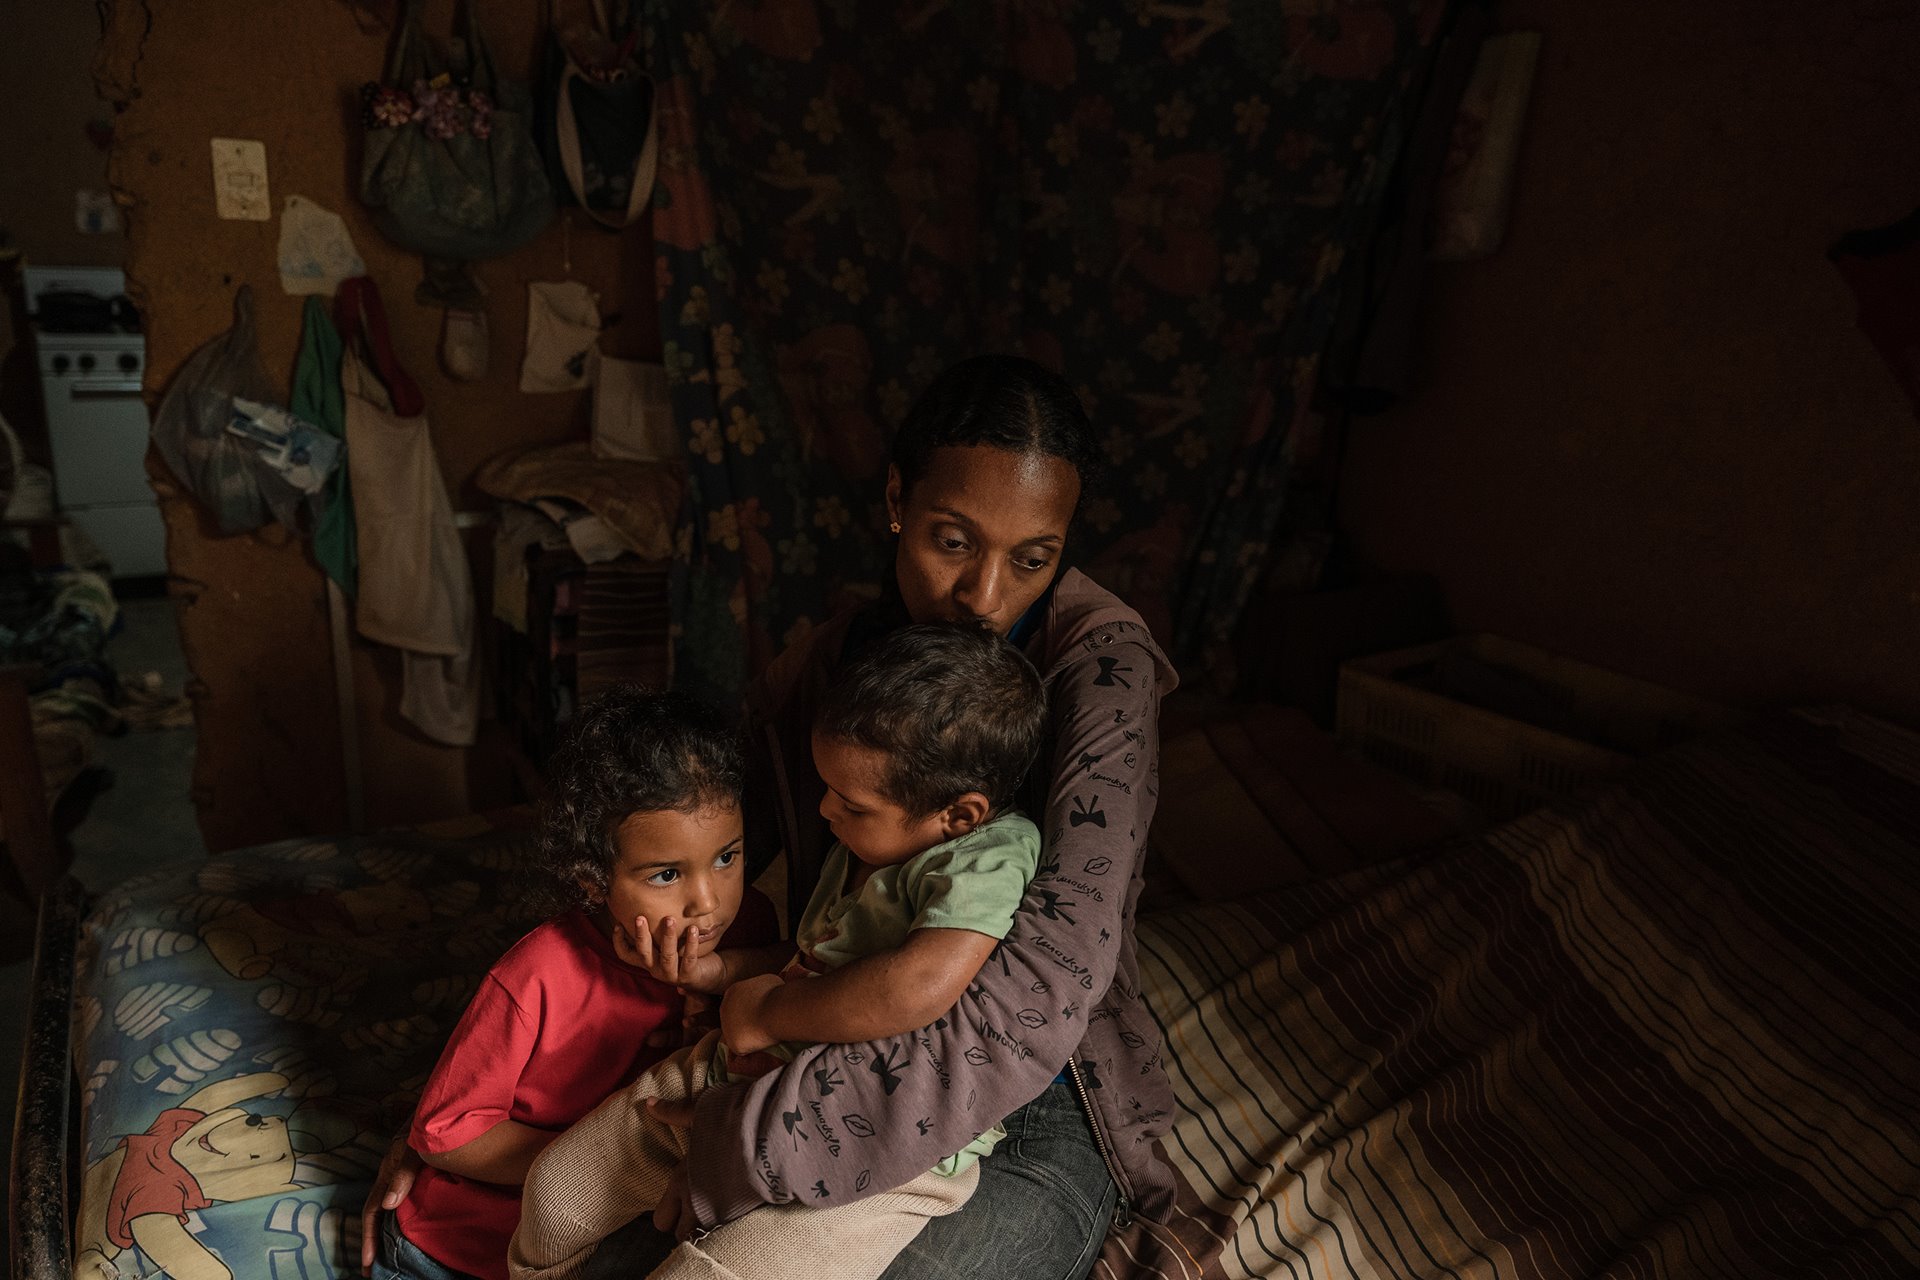 Yrelys Jimenez (38) holds her son Yonder Lopez-Jimenez (2) and her daughter, Clarelys Lopez-Jimenez (4) on the bed that the family shares, in San Diego de Los Altos, Venezuela. Her US$6 monthly salary barely covers her basic needs, so she plants beans and avocados to barter with her neighbors.